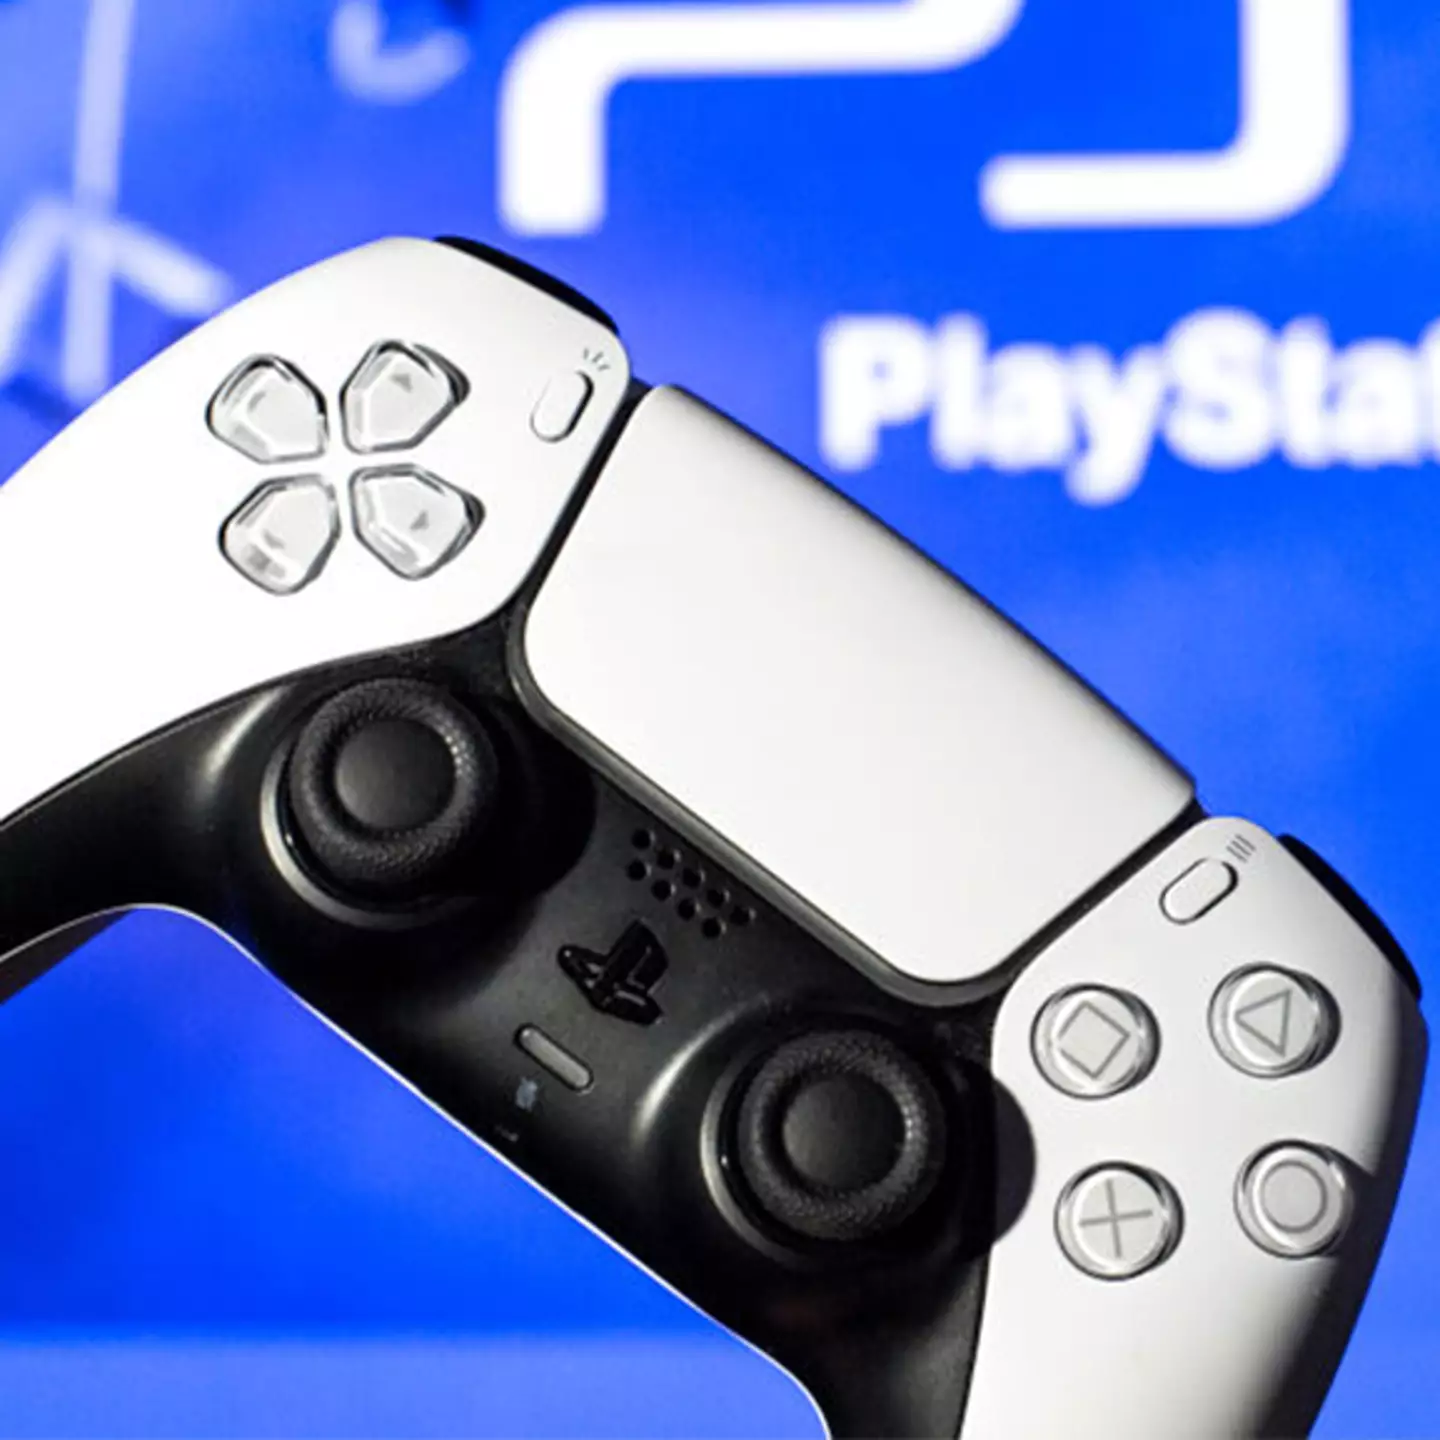 PlayStation gamers could receive up to £562 each from £5 billion lawsuit